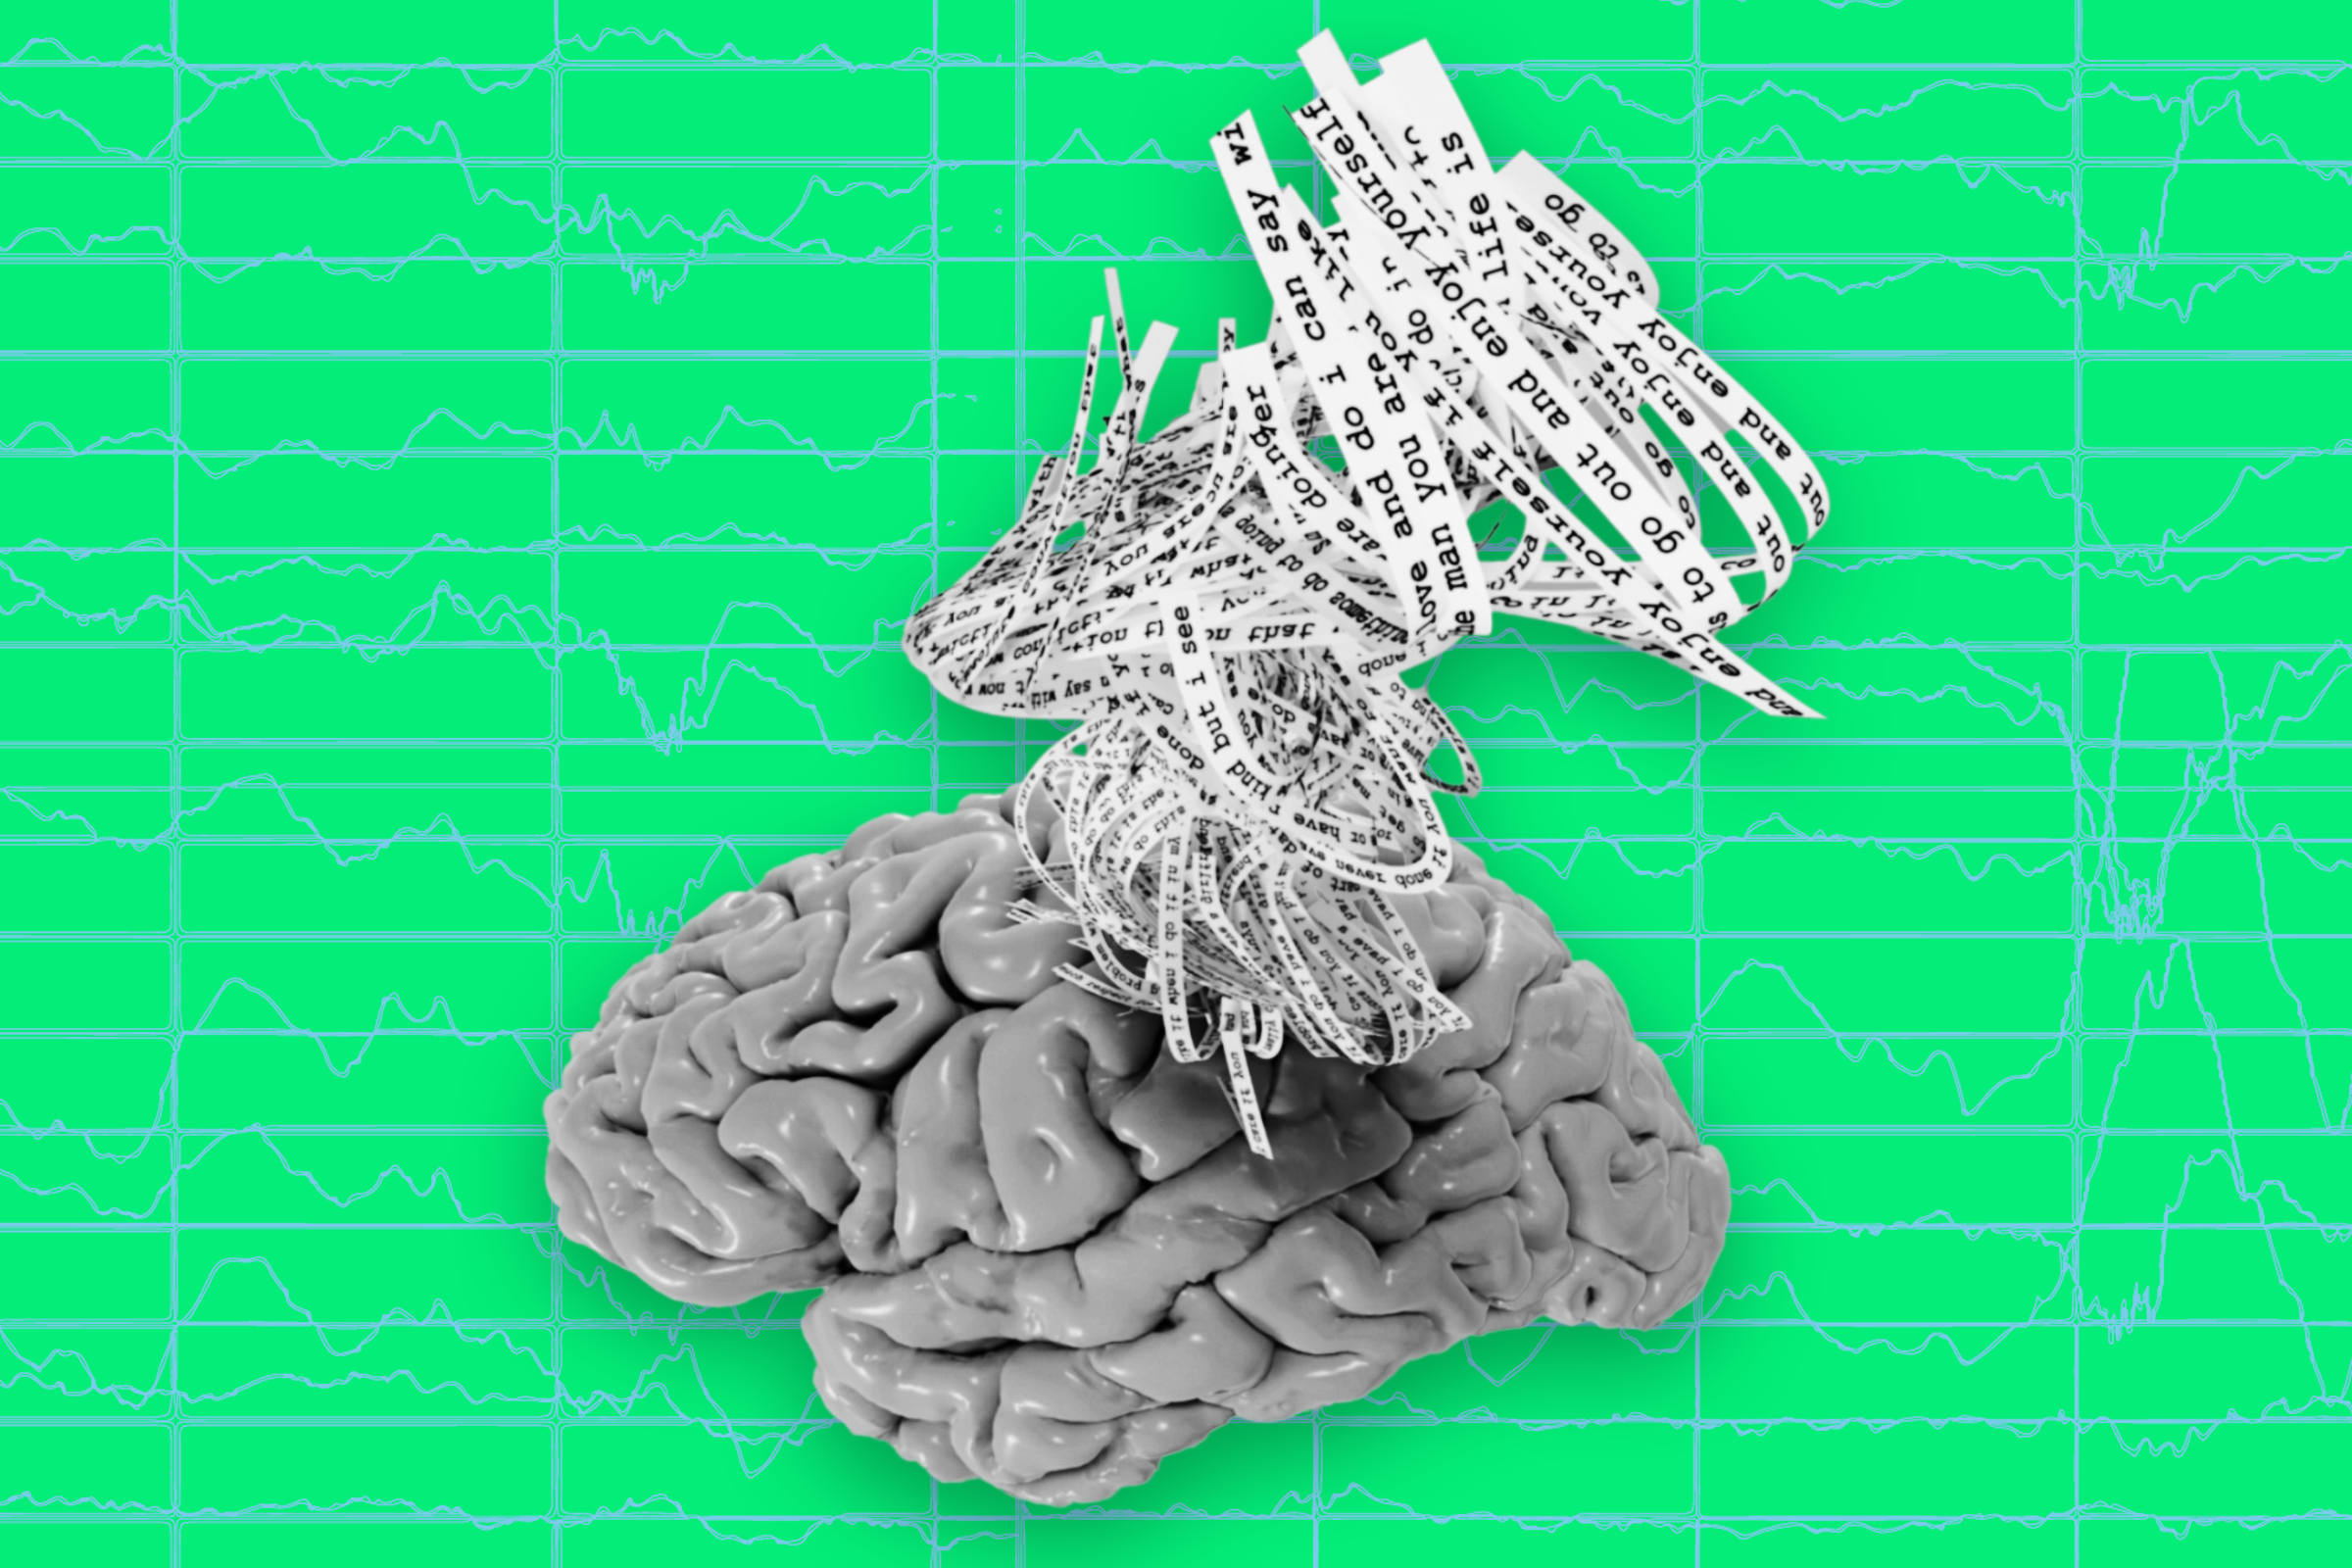 Strings of words spiral out from a brain